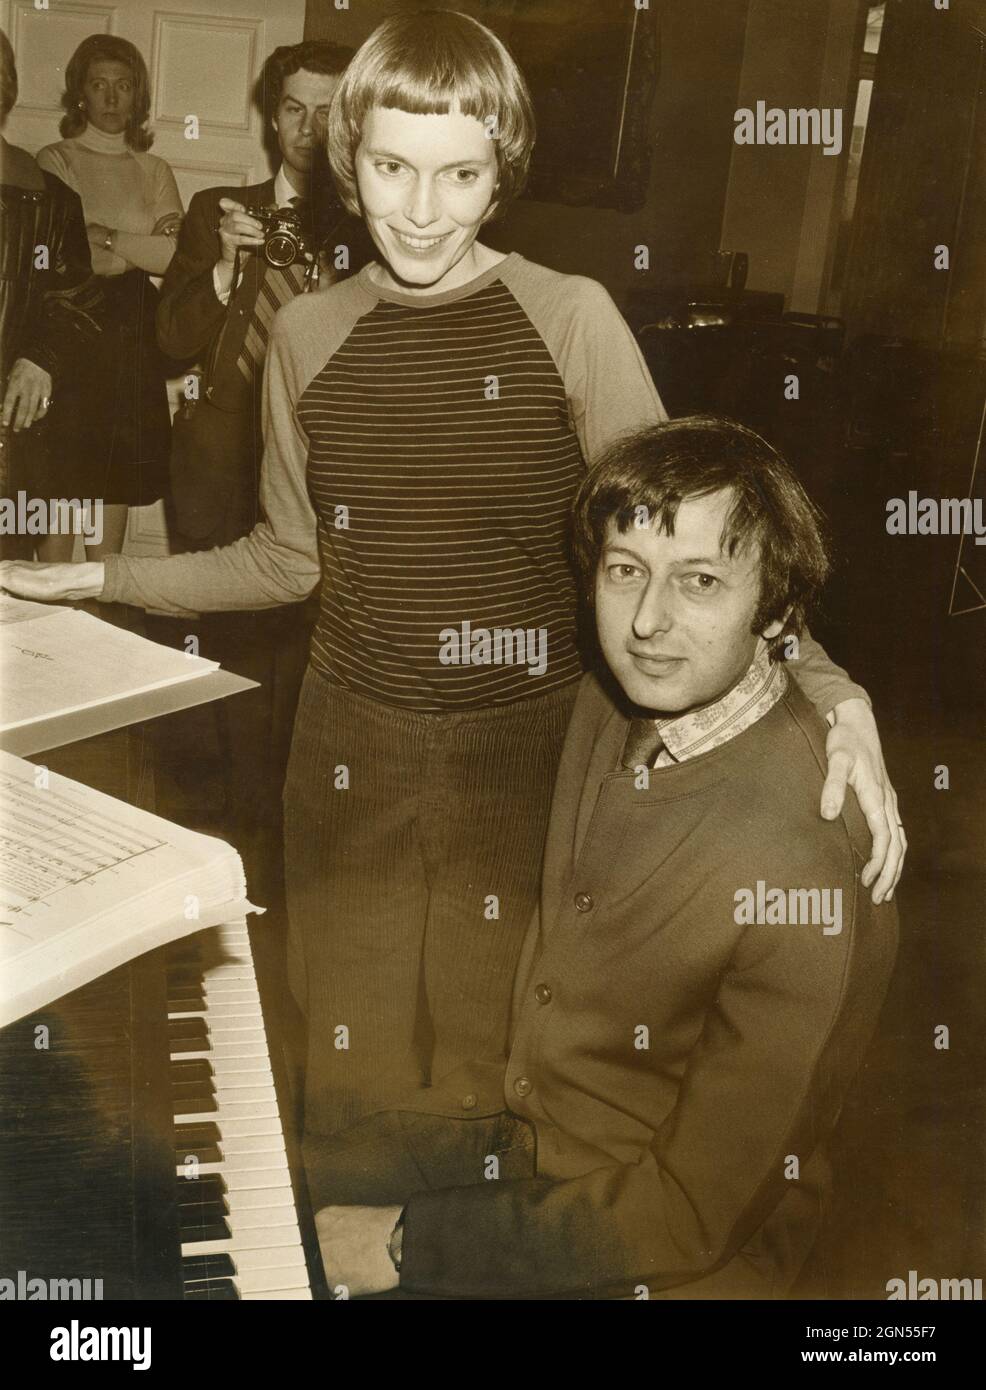 American film actress and model Mia Farrow and husband composer and pianist Andre Previn, Royal Albert Hall, London, UK 1971 Stock Photo